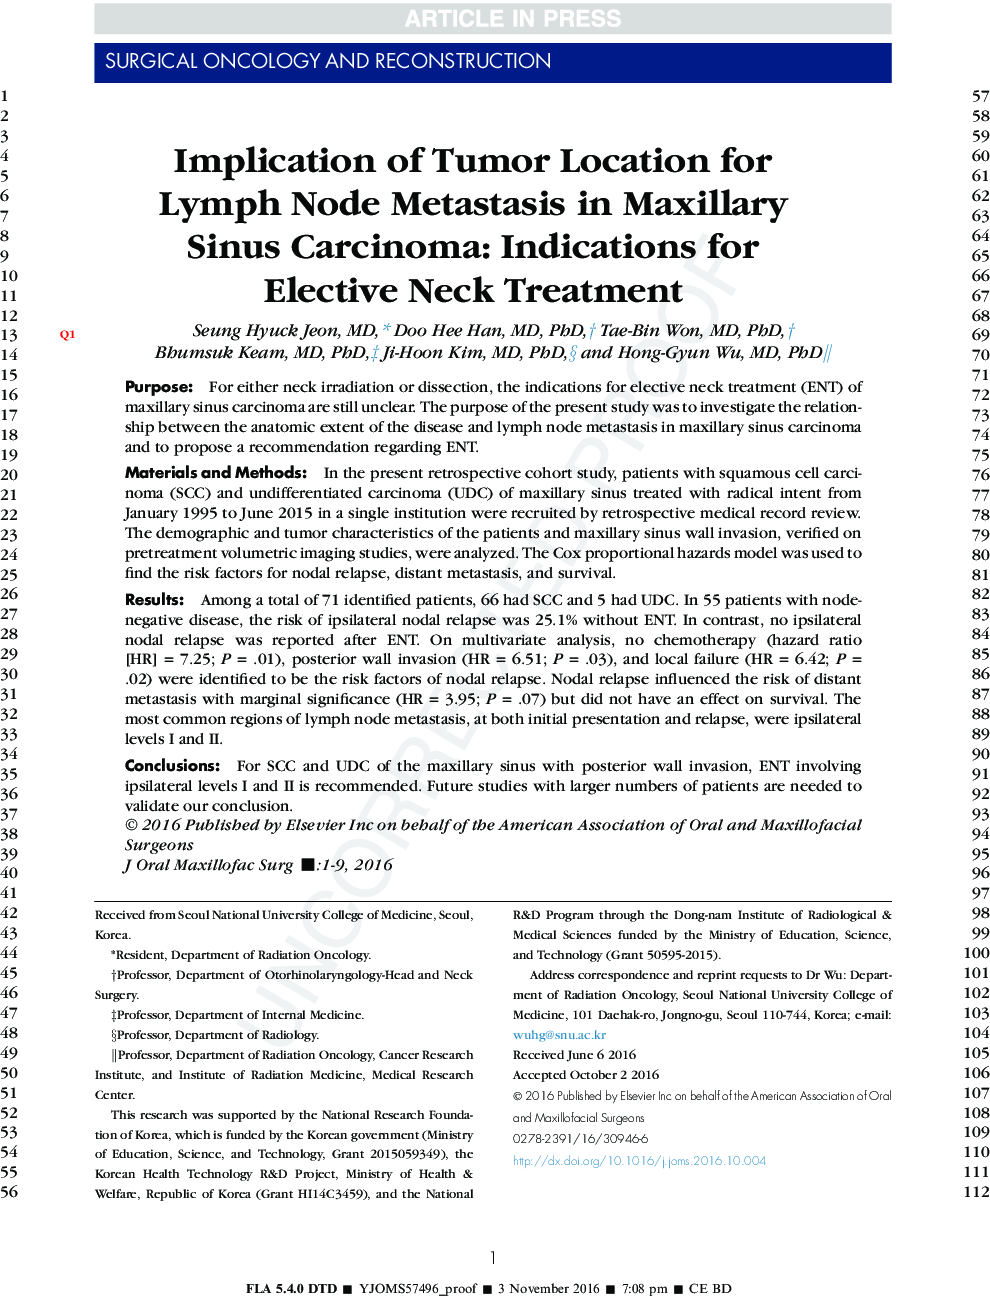 Implication of Tumor Location for Lymph Node Metastasis in Maxillary Sinus Carcinoma: Indications for Elective Neck Treatment